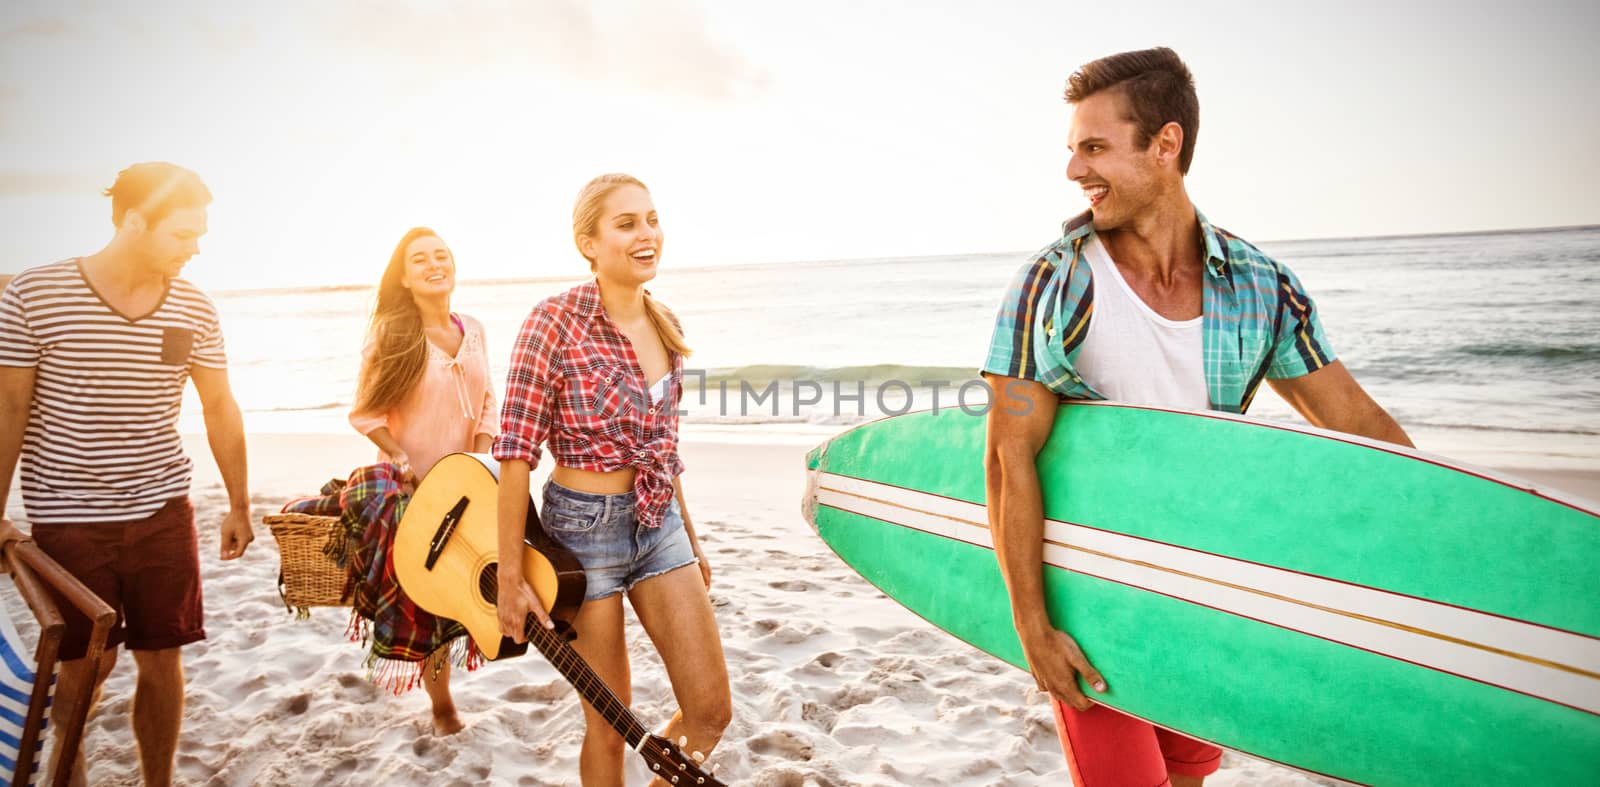 Friends carrying a surfboard and basket at the beach